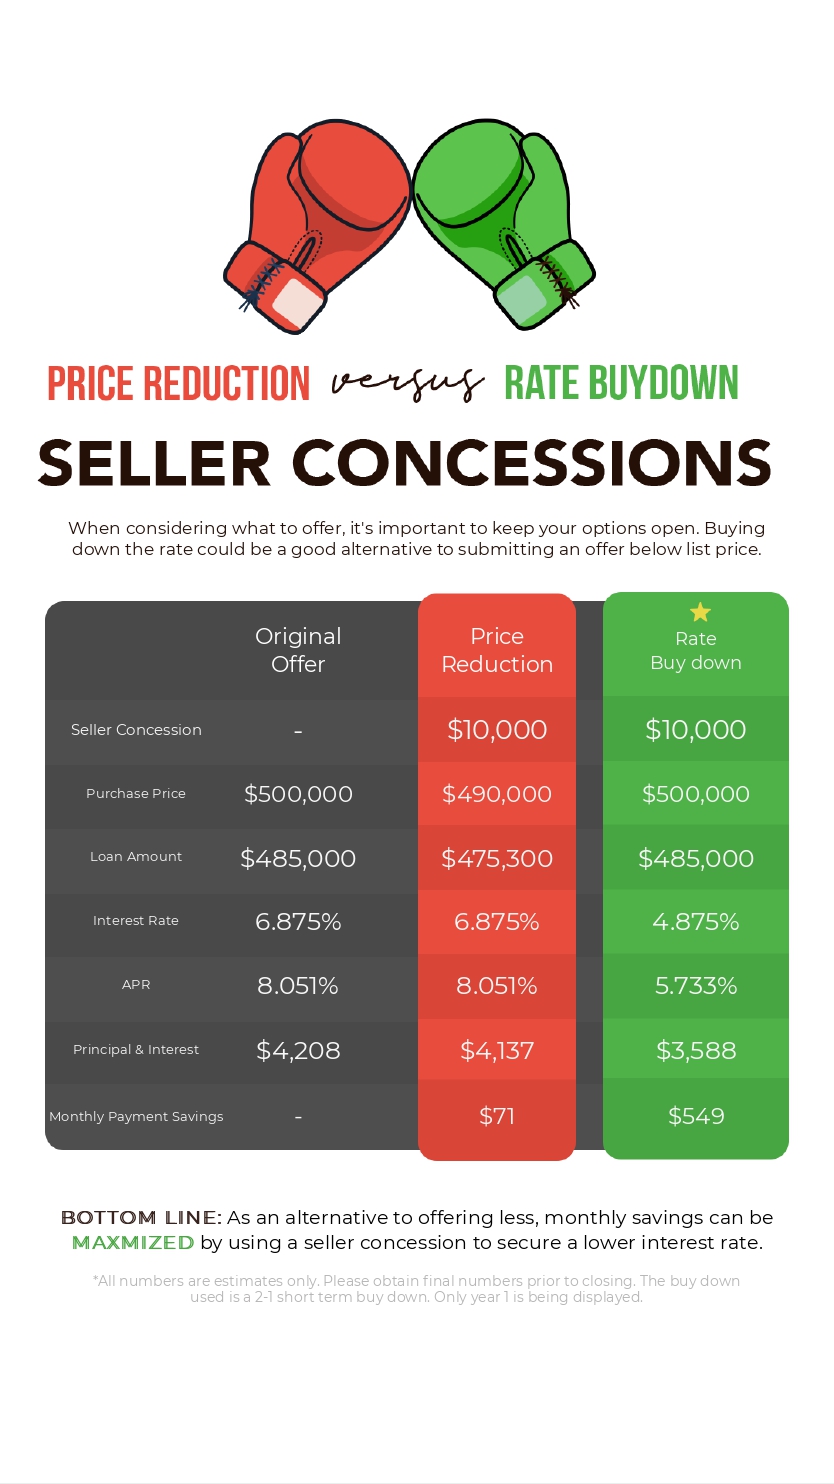 Price Reduction vs Rate Buy Down